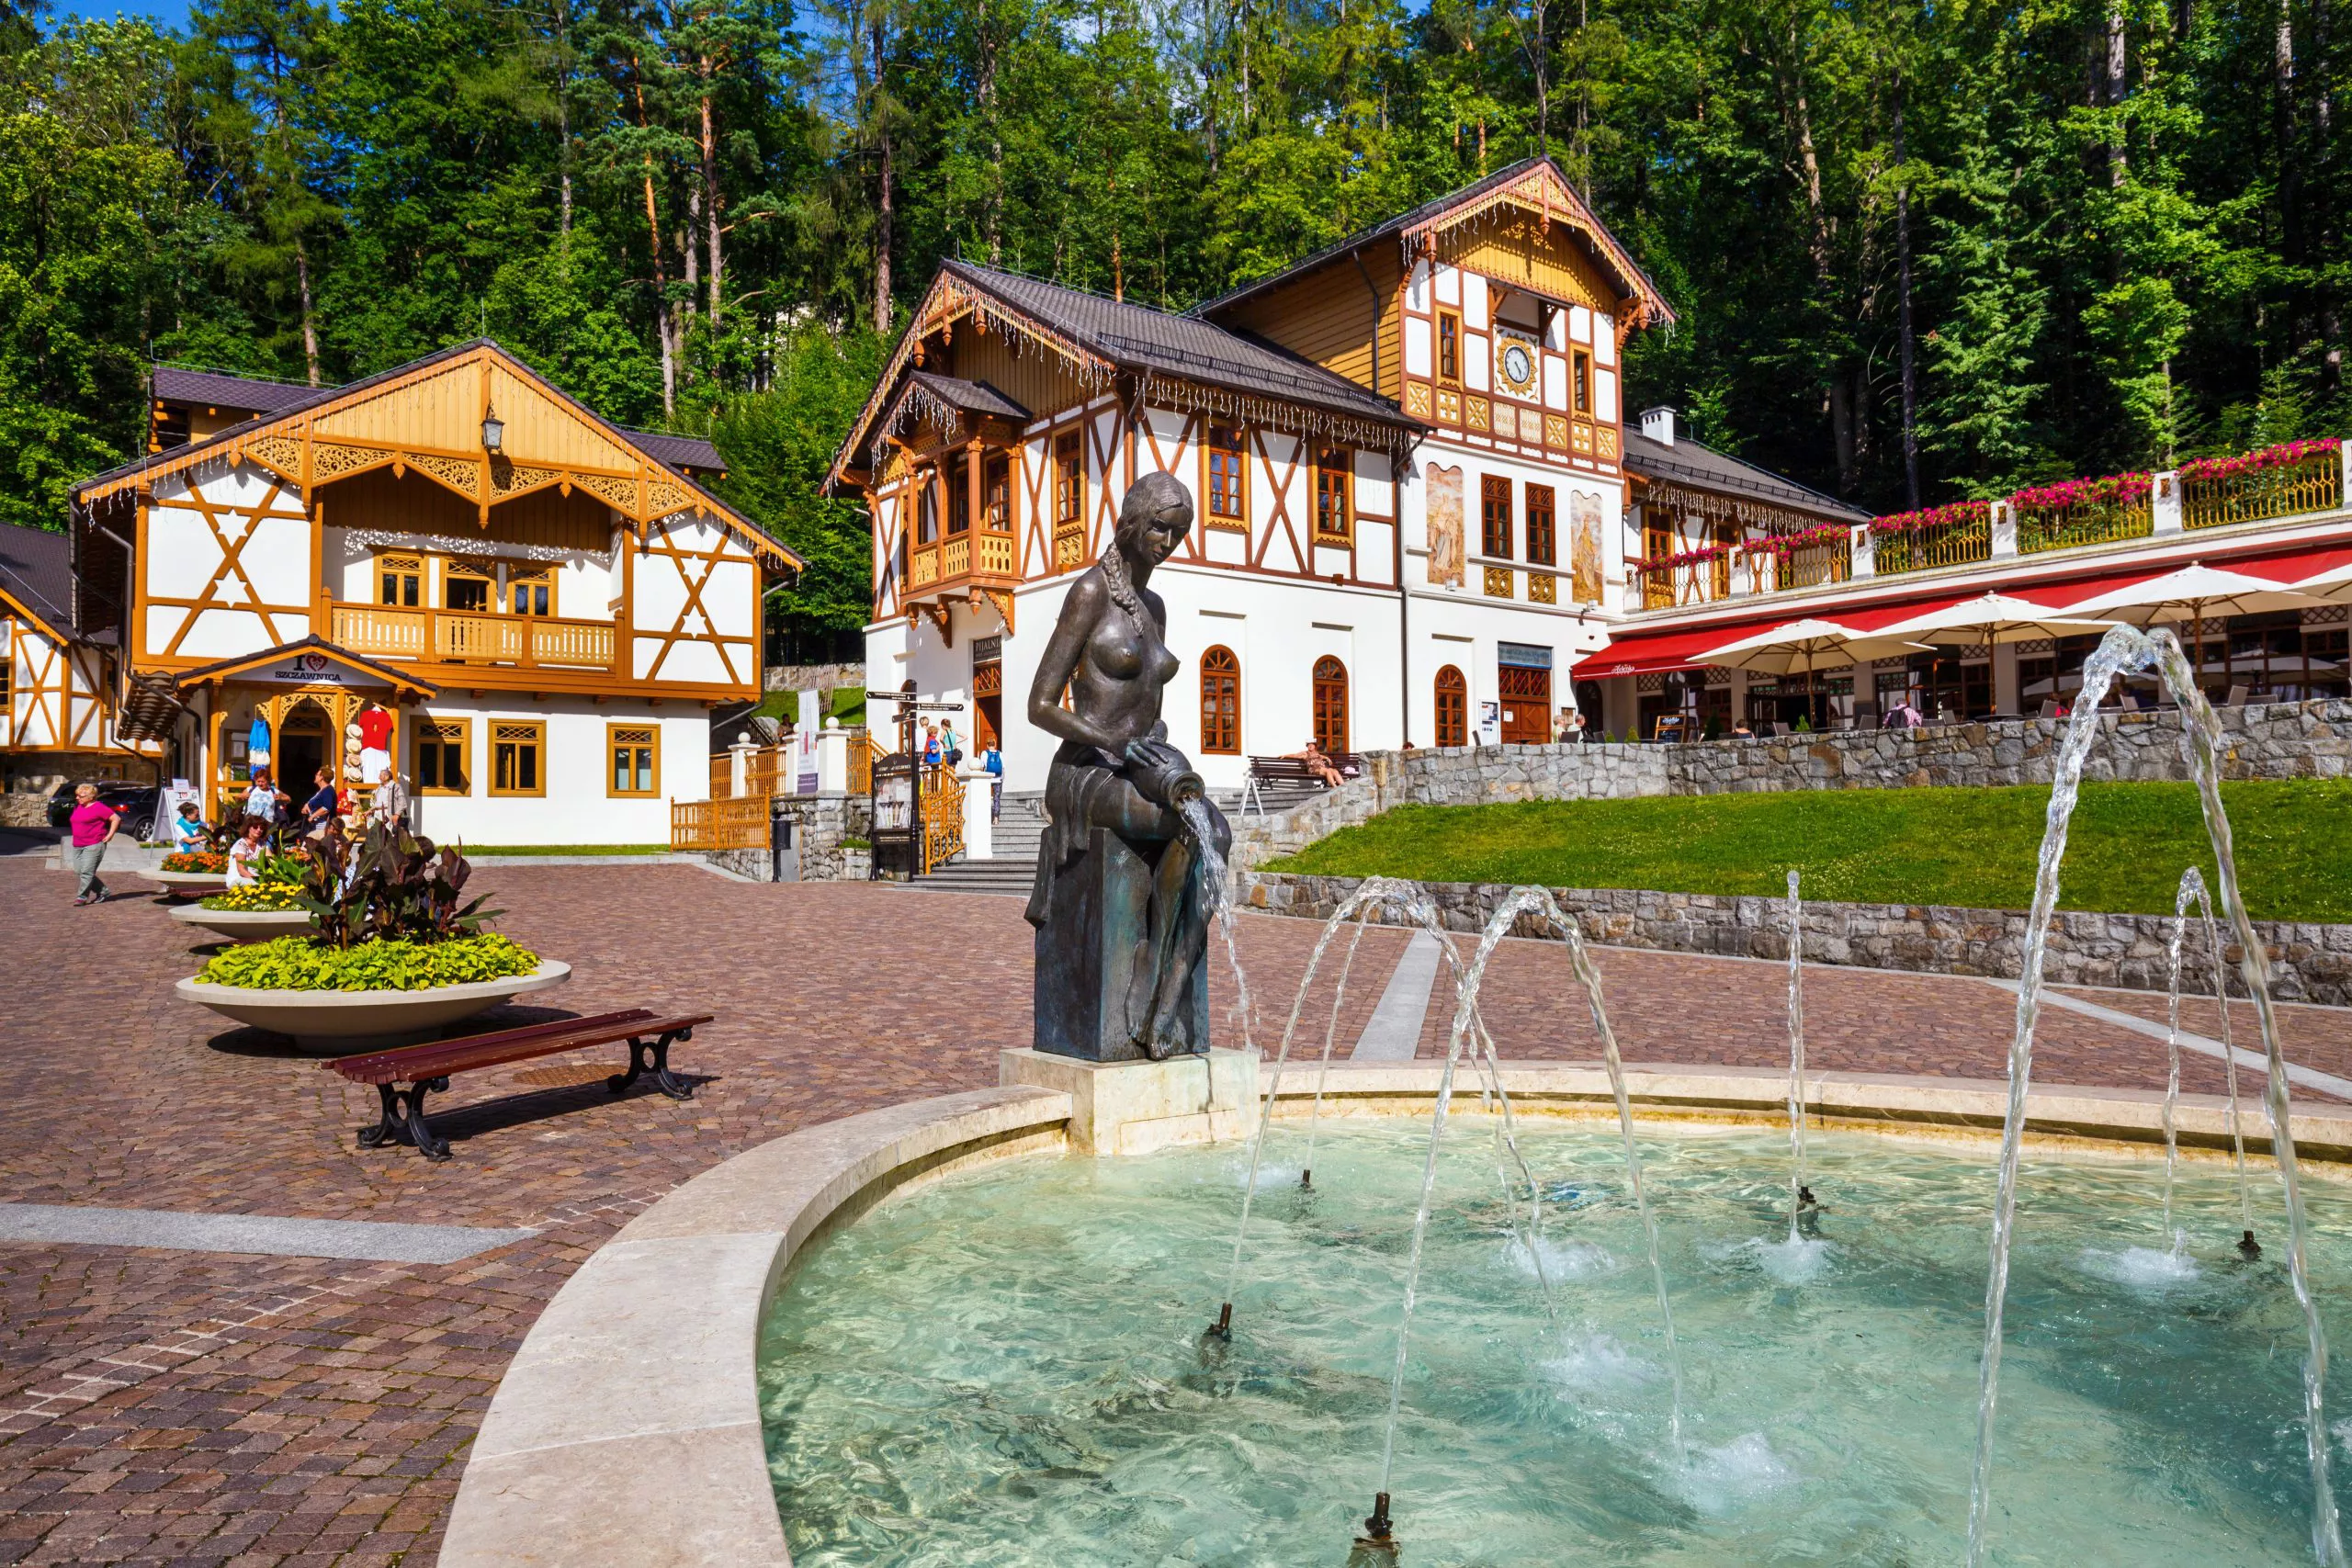 A view of the centre of Szczawnica spa focusing on the Dom nad Zdrojami pump room. There is a round fountain with waterjets and a woman’s statue in the foreground, and Café Helenka above it on the right.